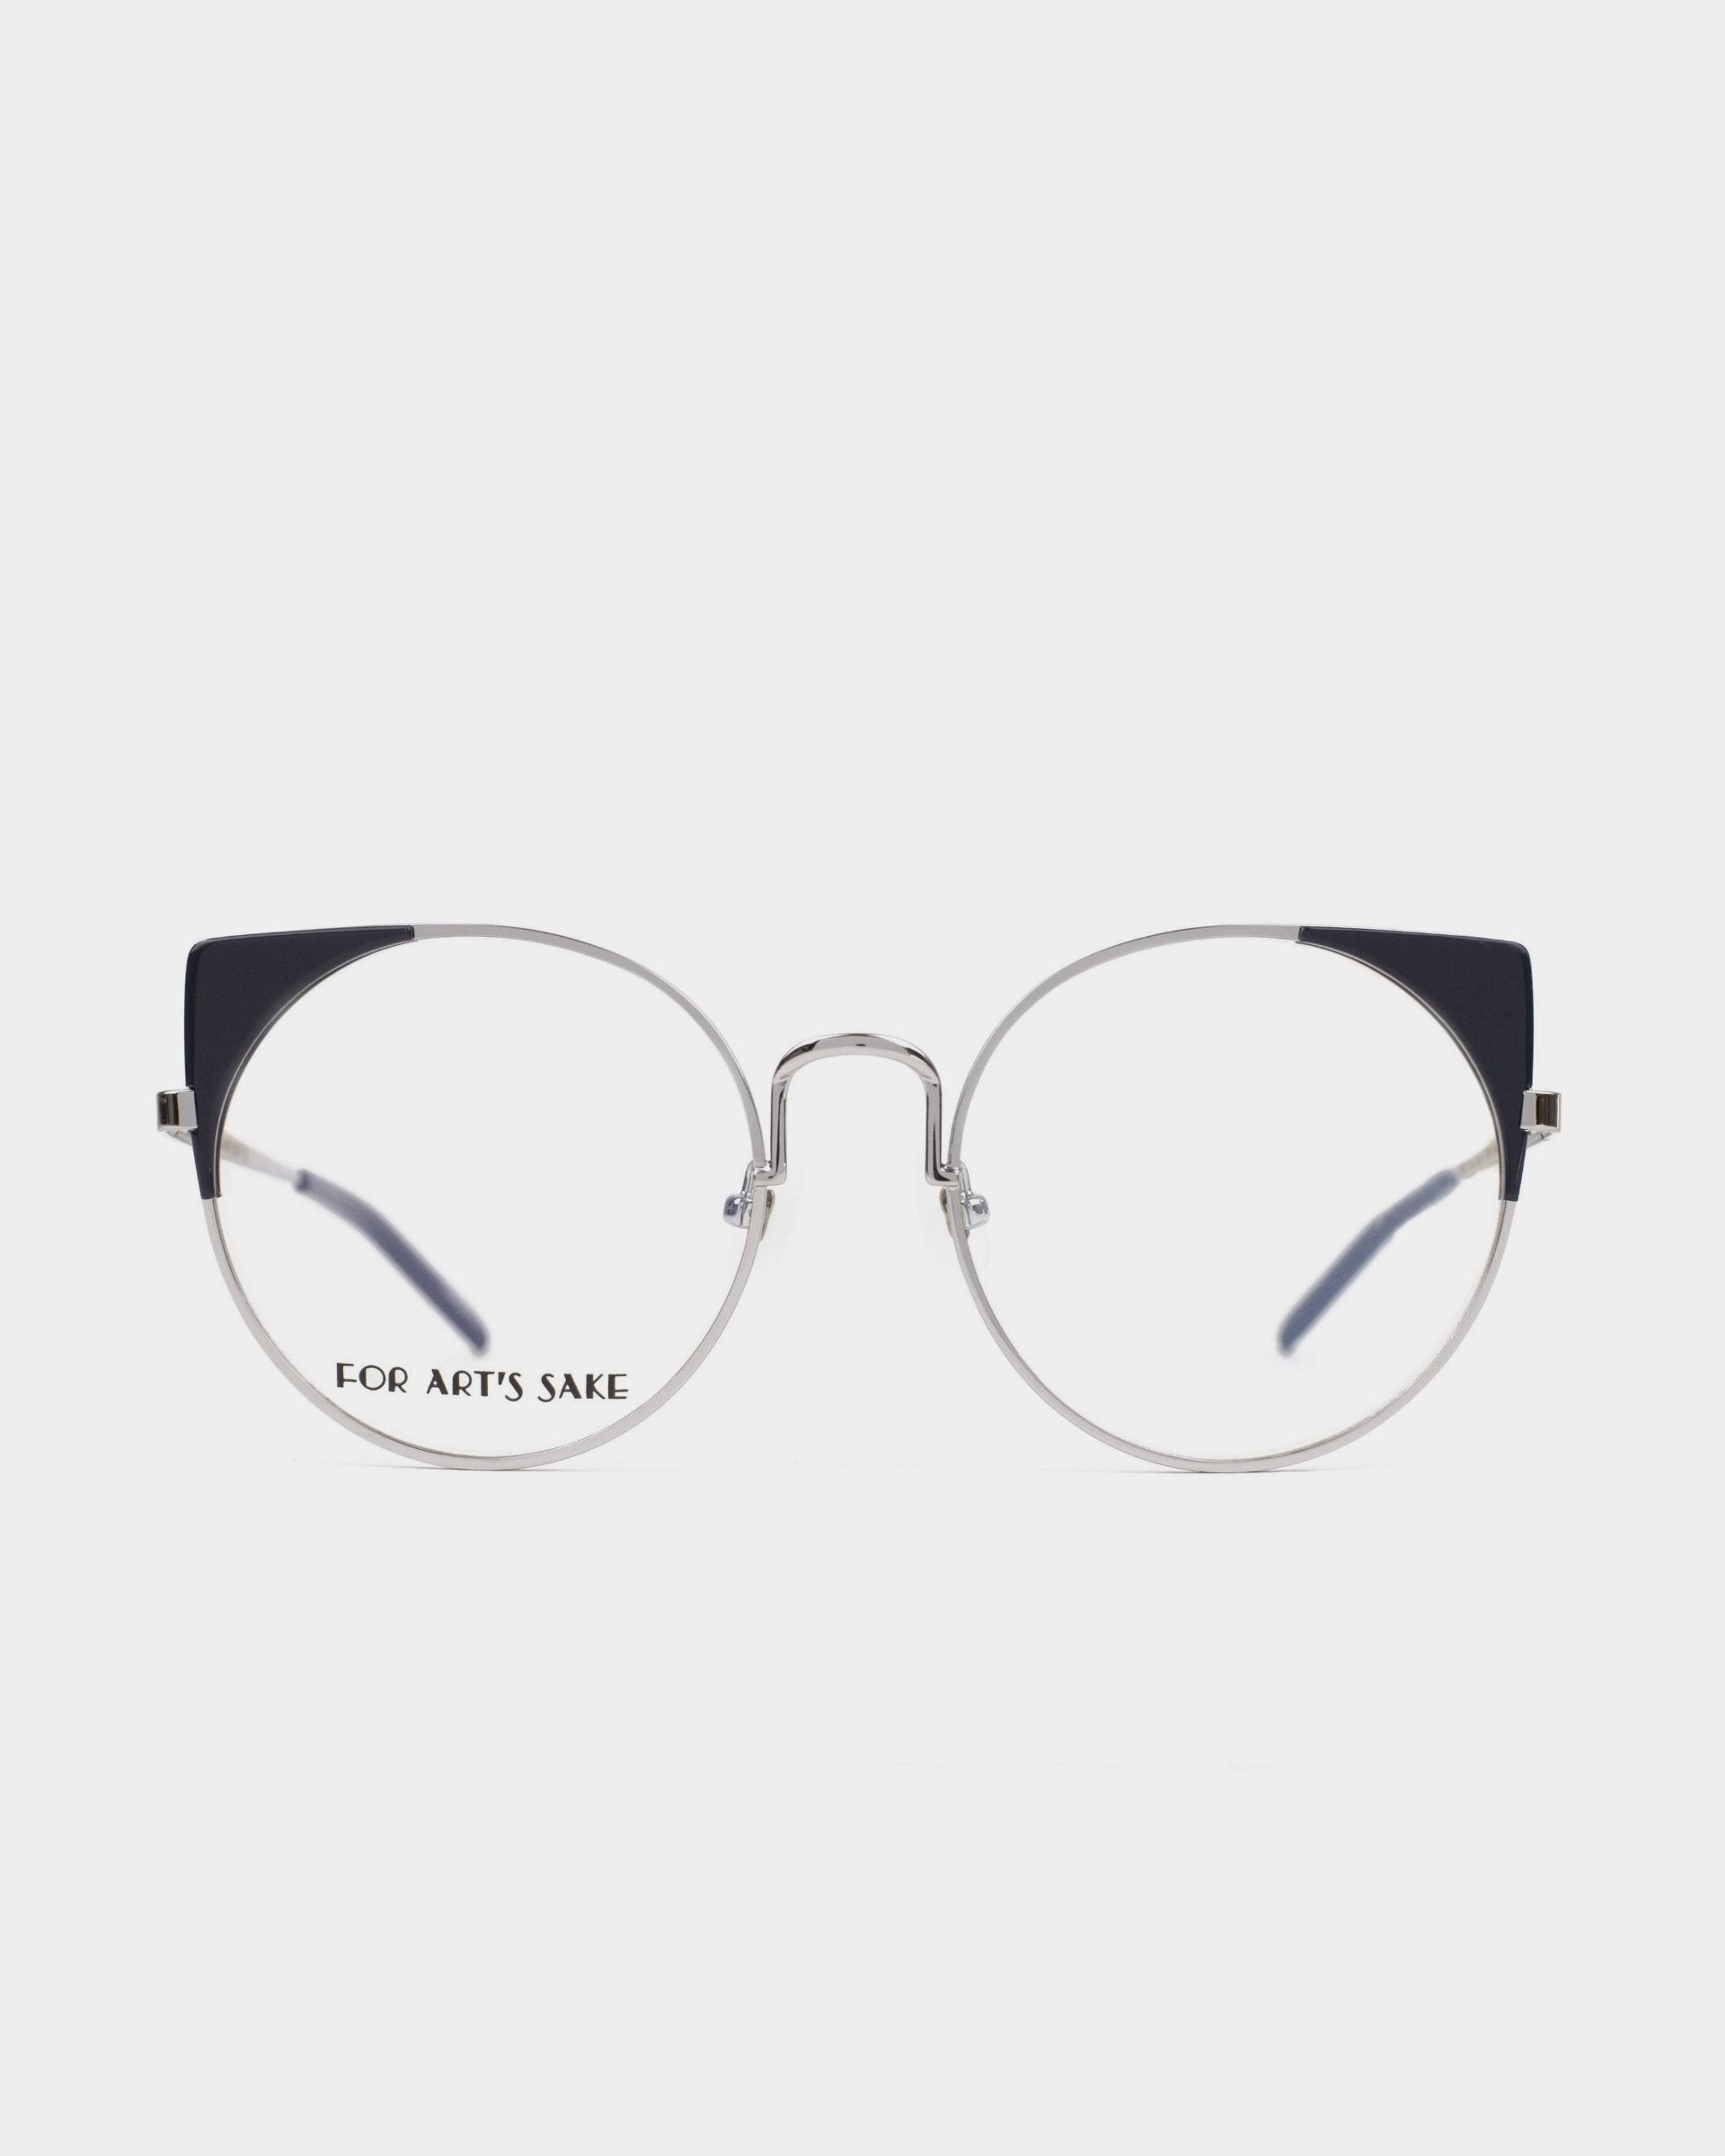 A pair of round, silver-framed Brisky eyeglasses with dark blue accents on the upper corners of the lenses. The left lens has the text "For Art's Sake®" on it. These stylish glasses also feature a blue light filter for added eye protection. The background is plain white.